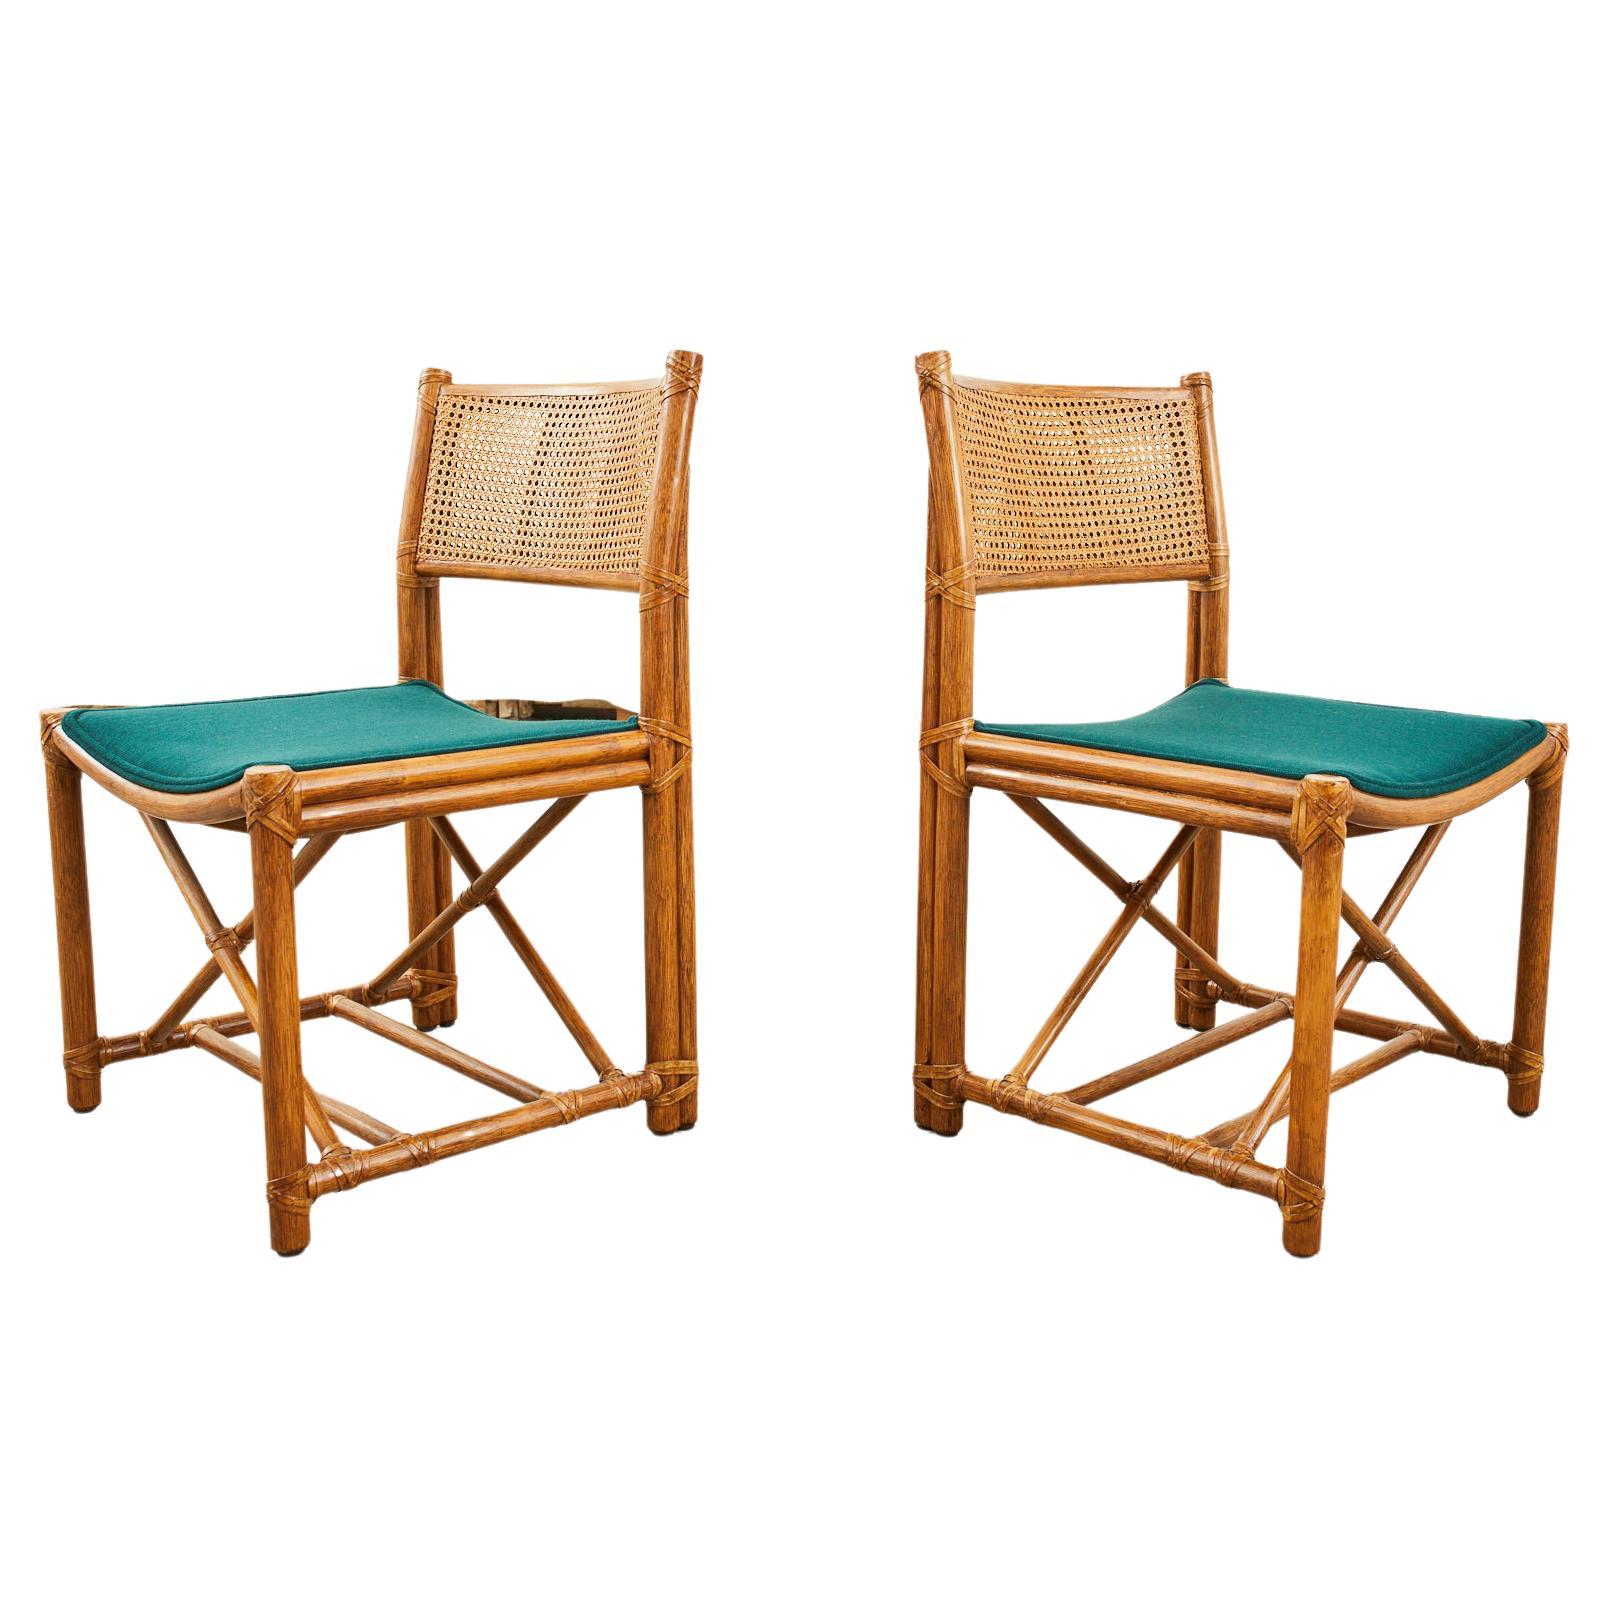 Pair of McGuire Rattan Caned Directors Style Dining Chairs